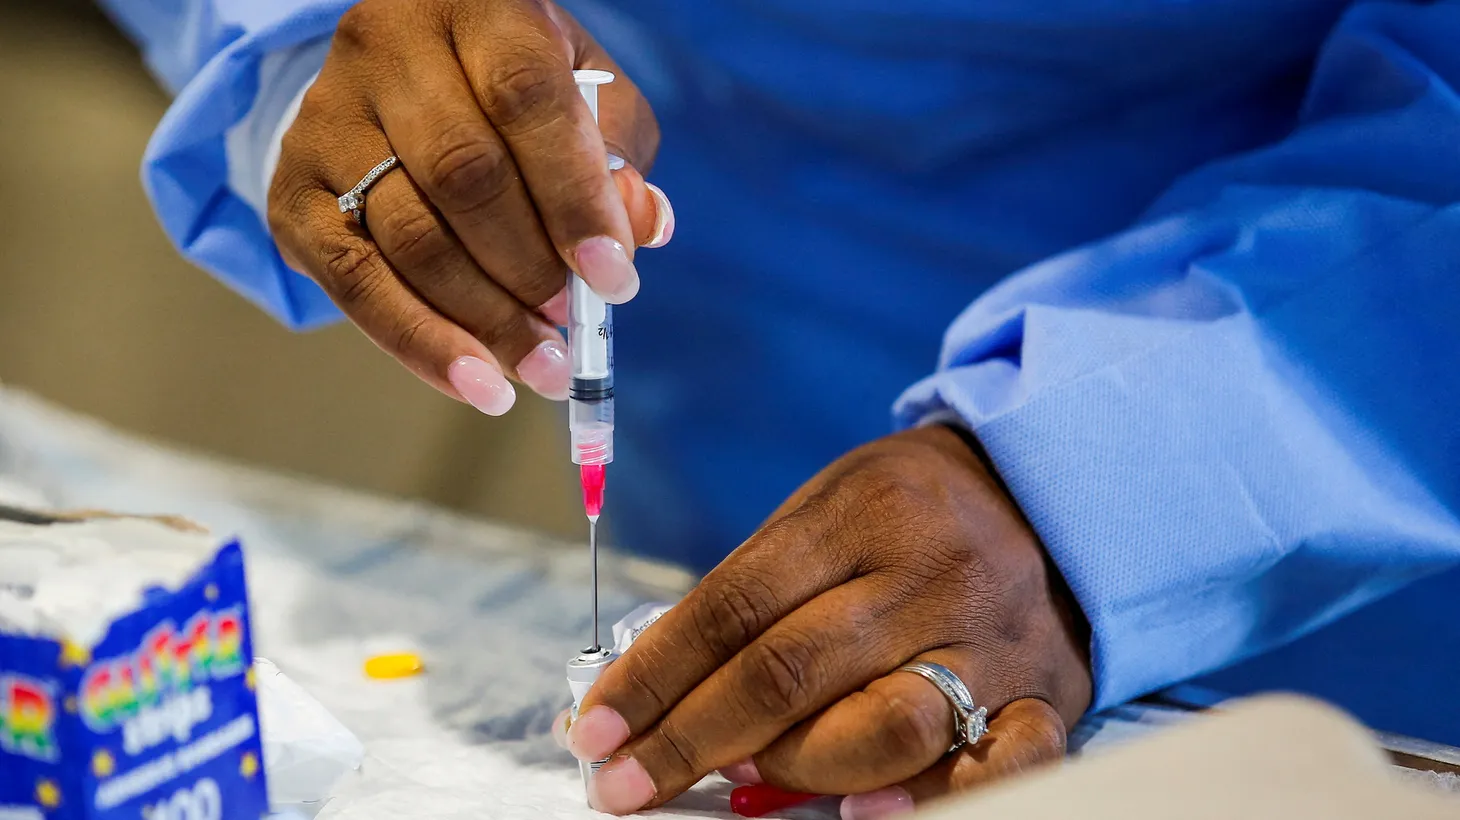 A health worker prepares a monkeypox vaccine at a drive-through vaccination point at the Westchester Medical Center in Valhalla, New York, U.S., July 28, 2022.